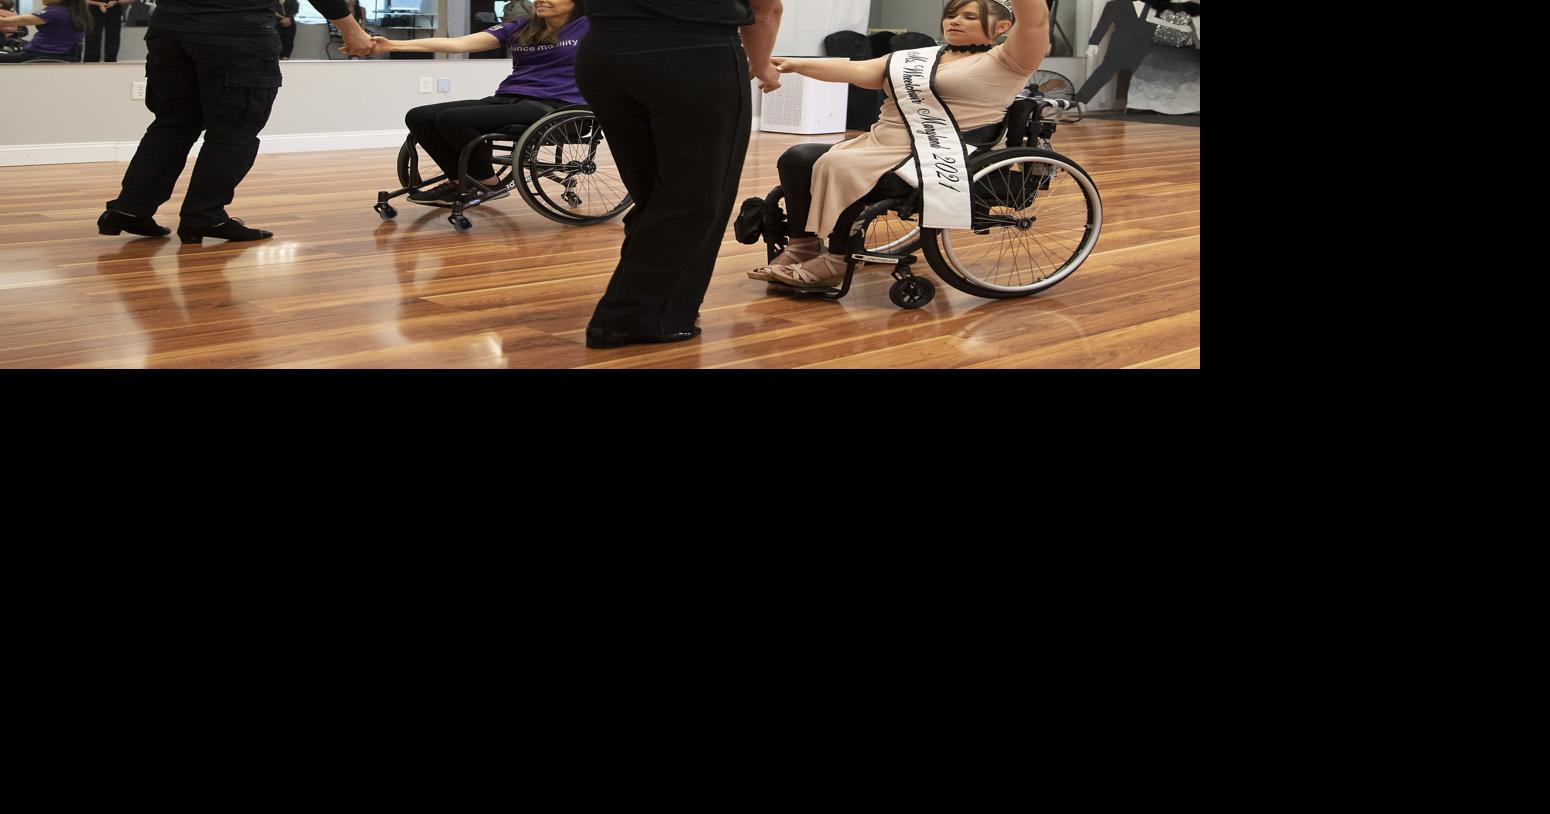 Paralympian Hosts Wheelchair Ballroom Dancing Classes In Frederick Arts And Entertainment